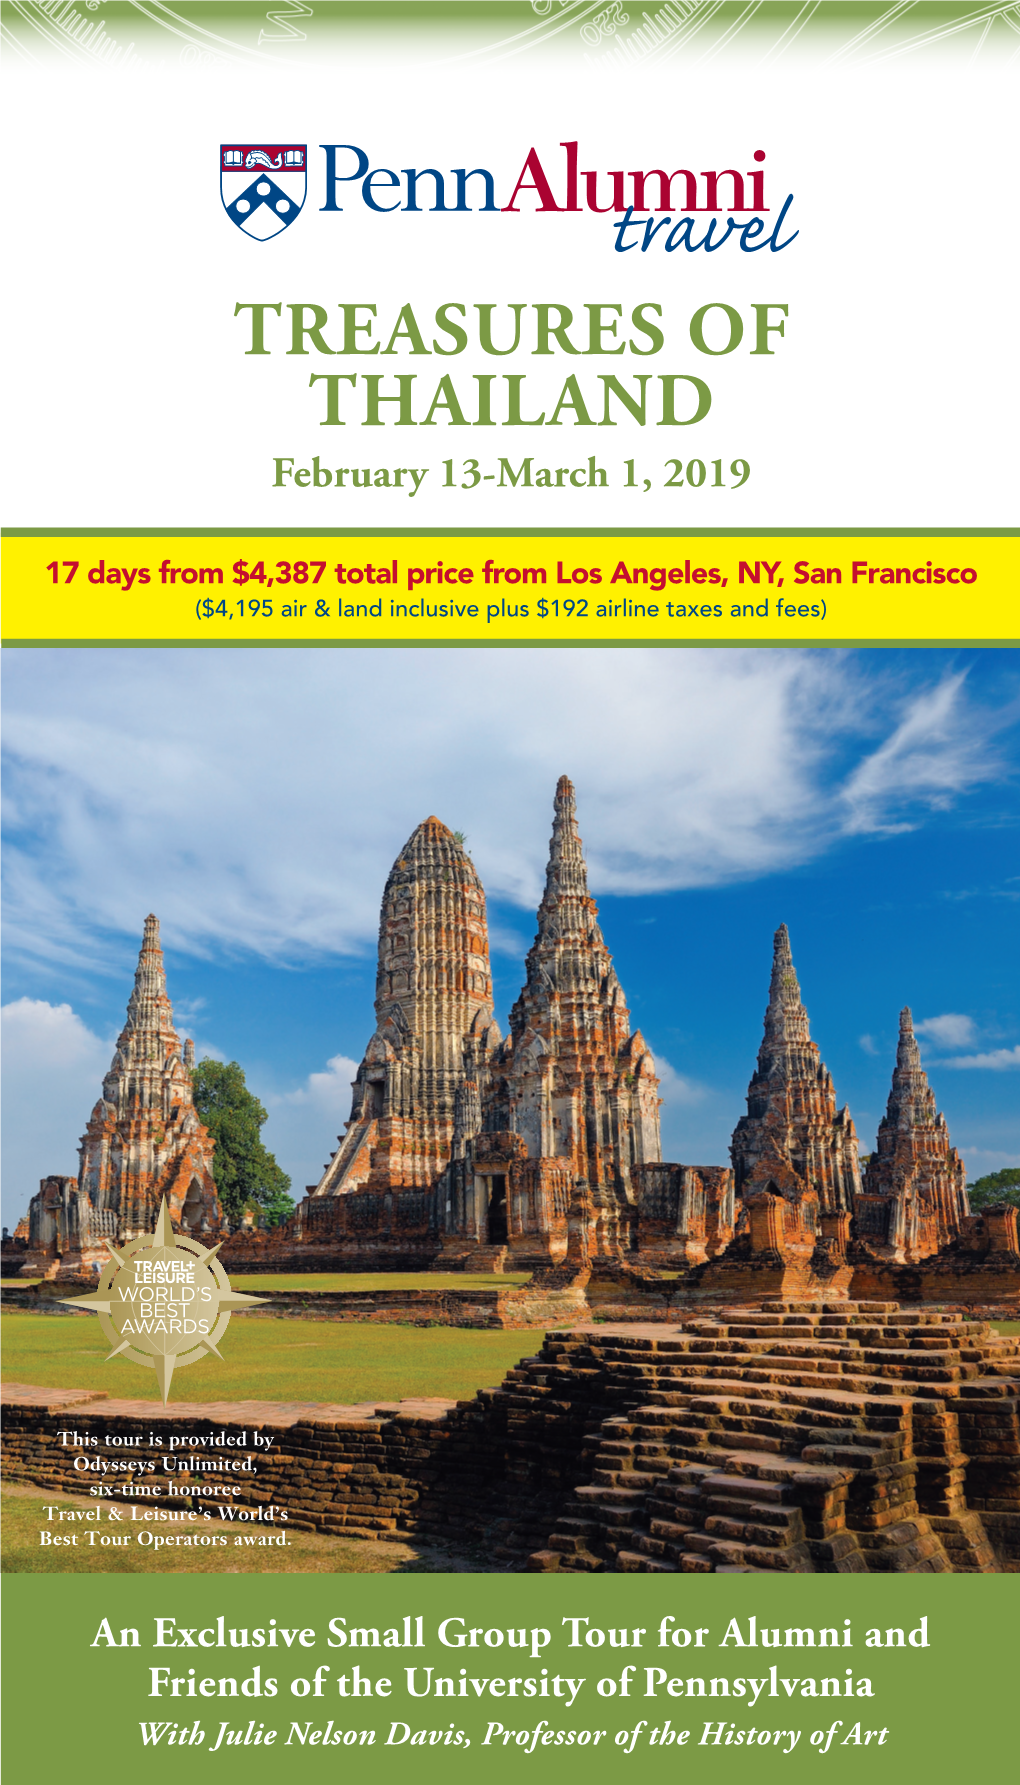 TREASURES of THAILAND February 13-March 1, 2019